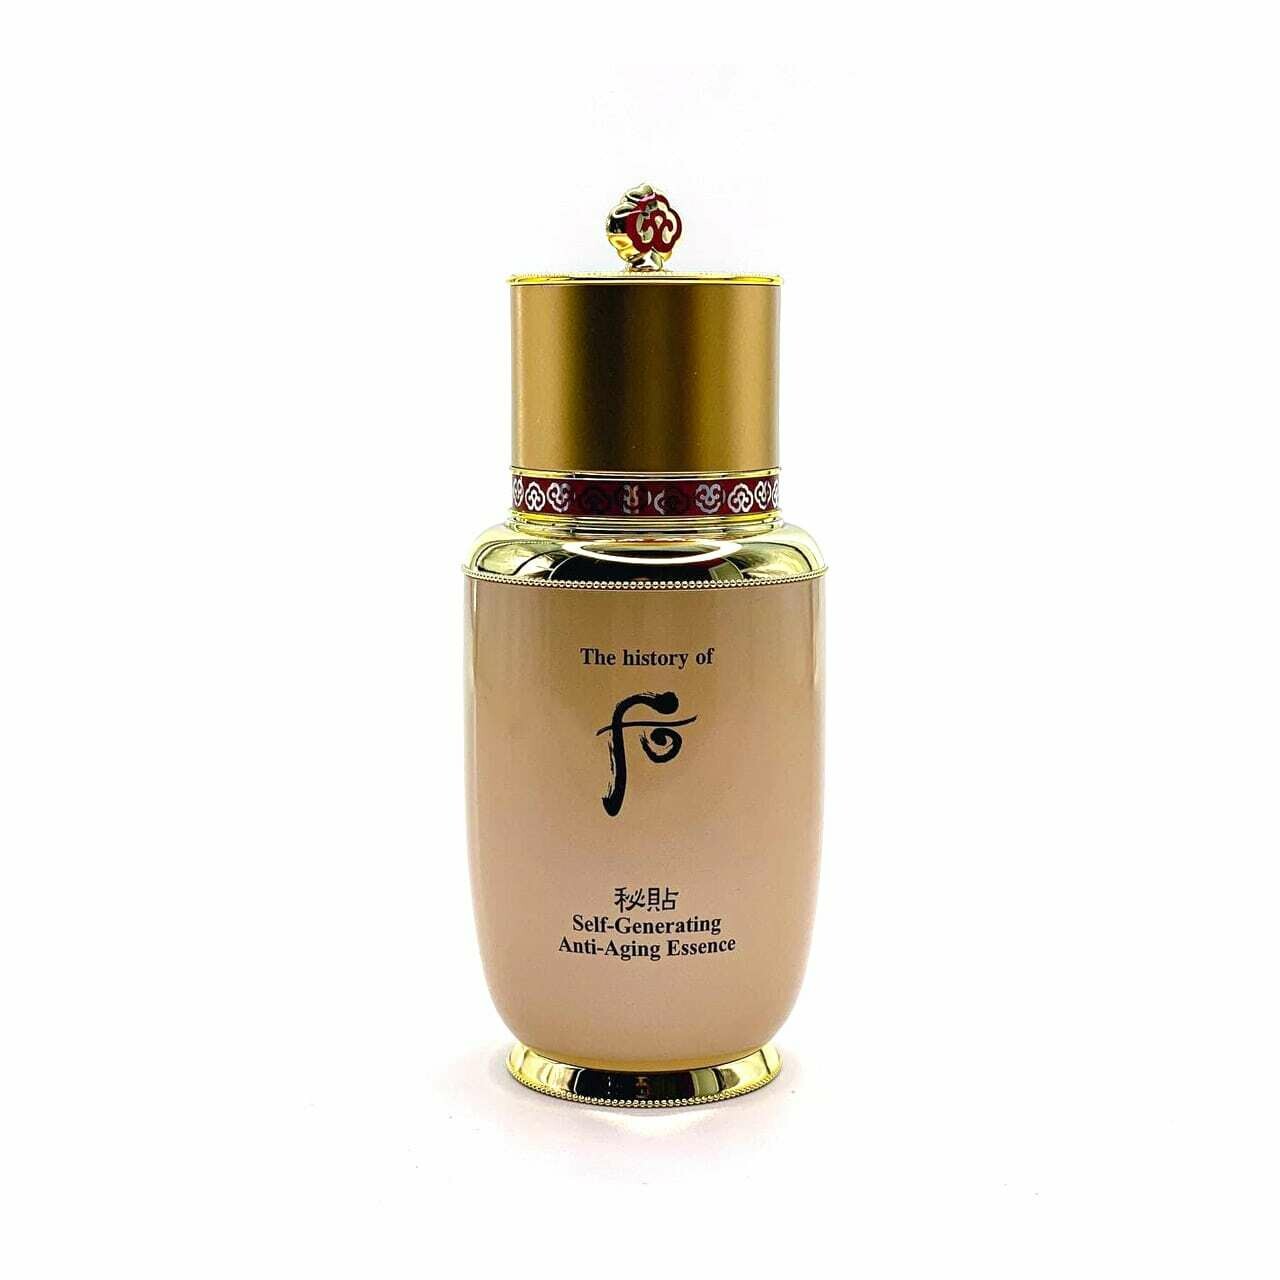 THE HISTORY OF WHOO Self-Generating Anti-Aging Essence